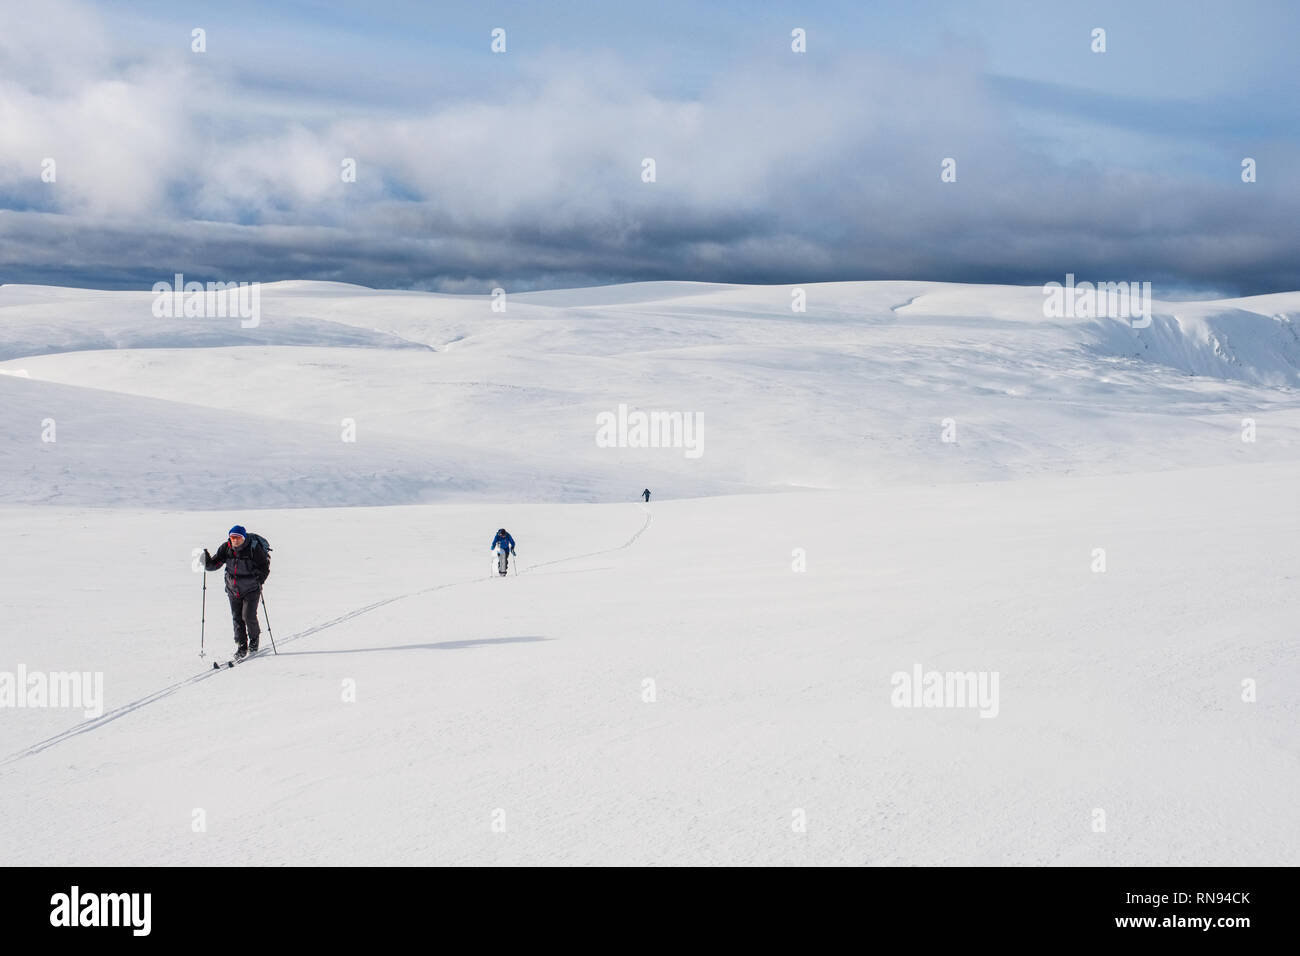 Group of ski-mountaineers ski touring on the Feshie plateau in the Cairngorm mountains, Scotland,UK Stock Photo